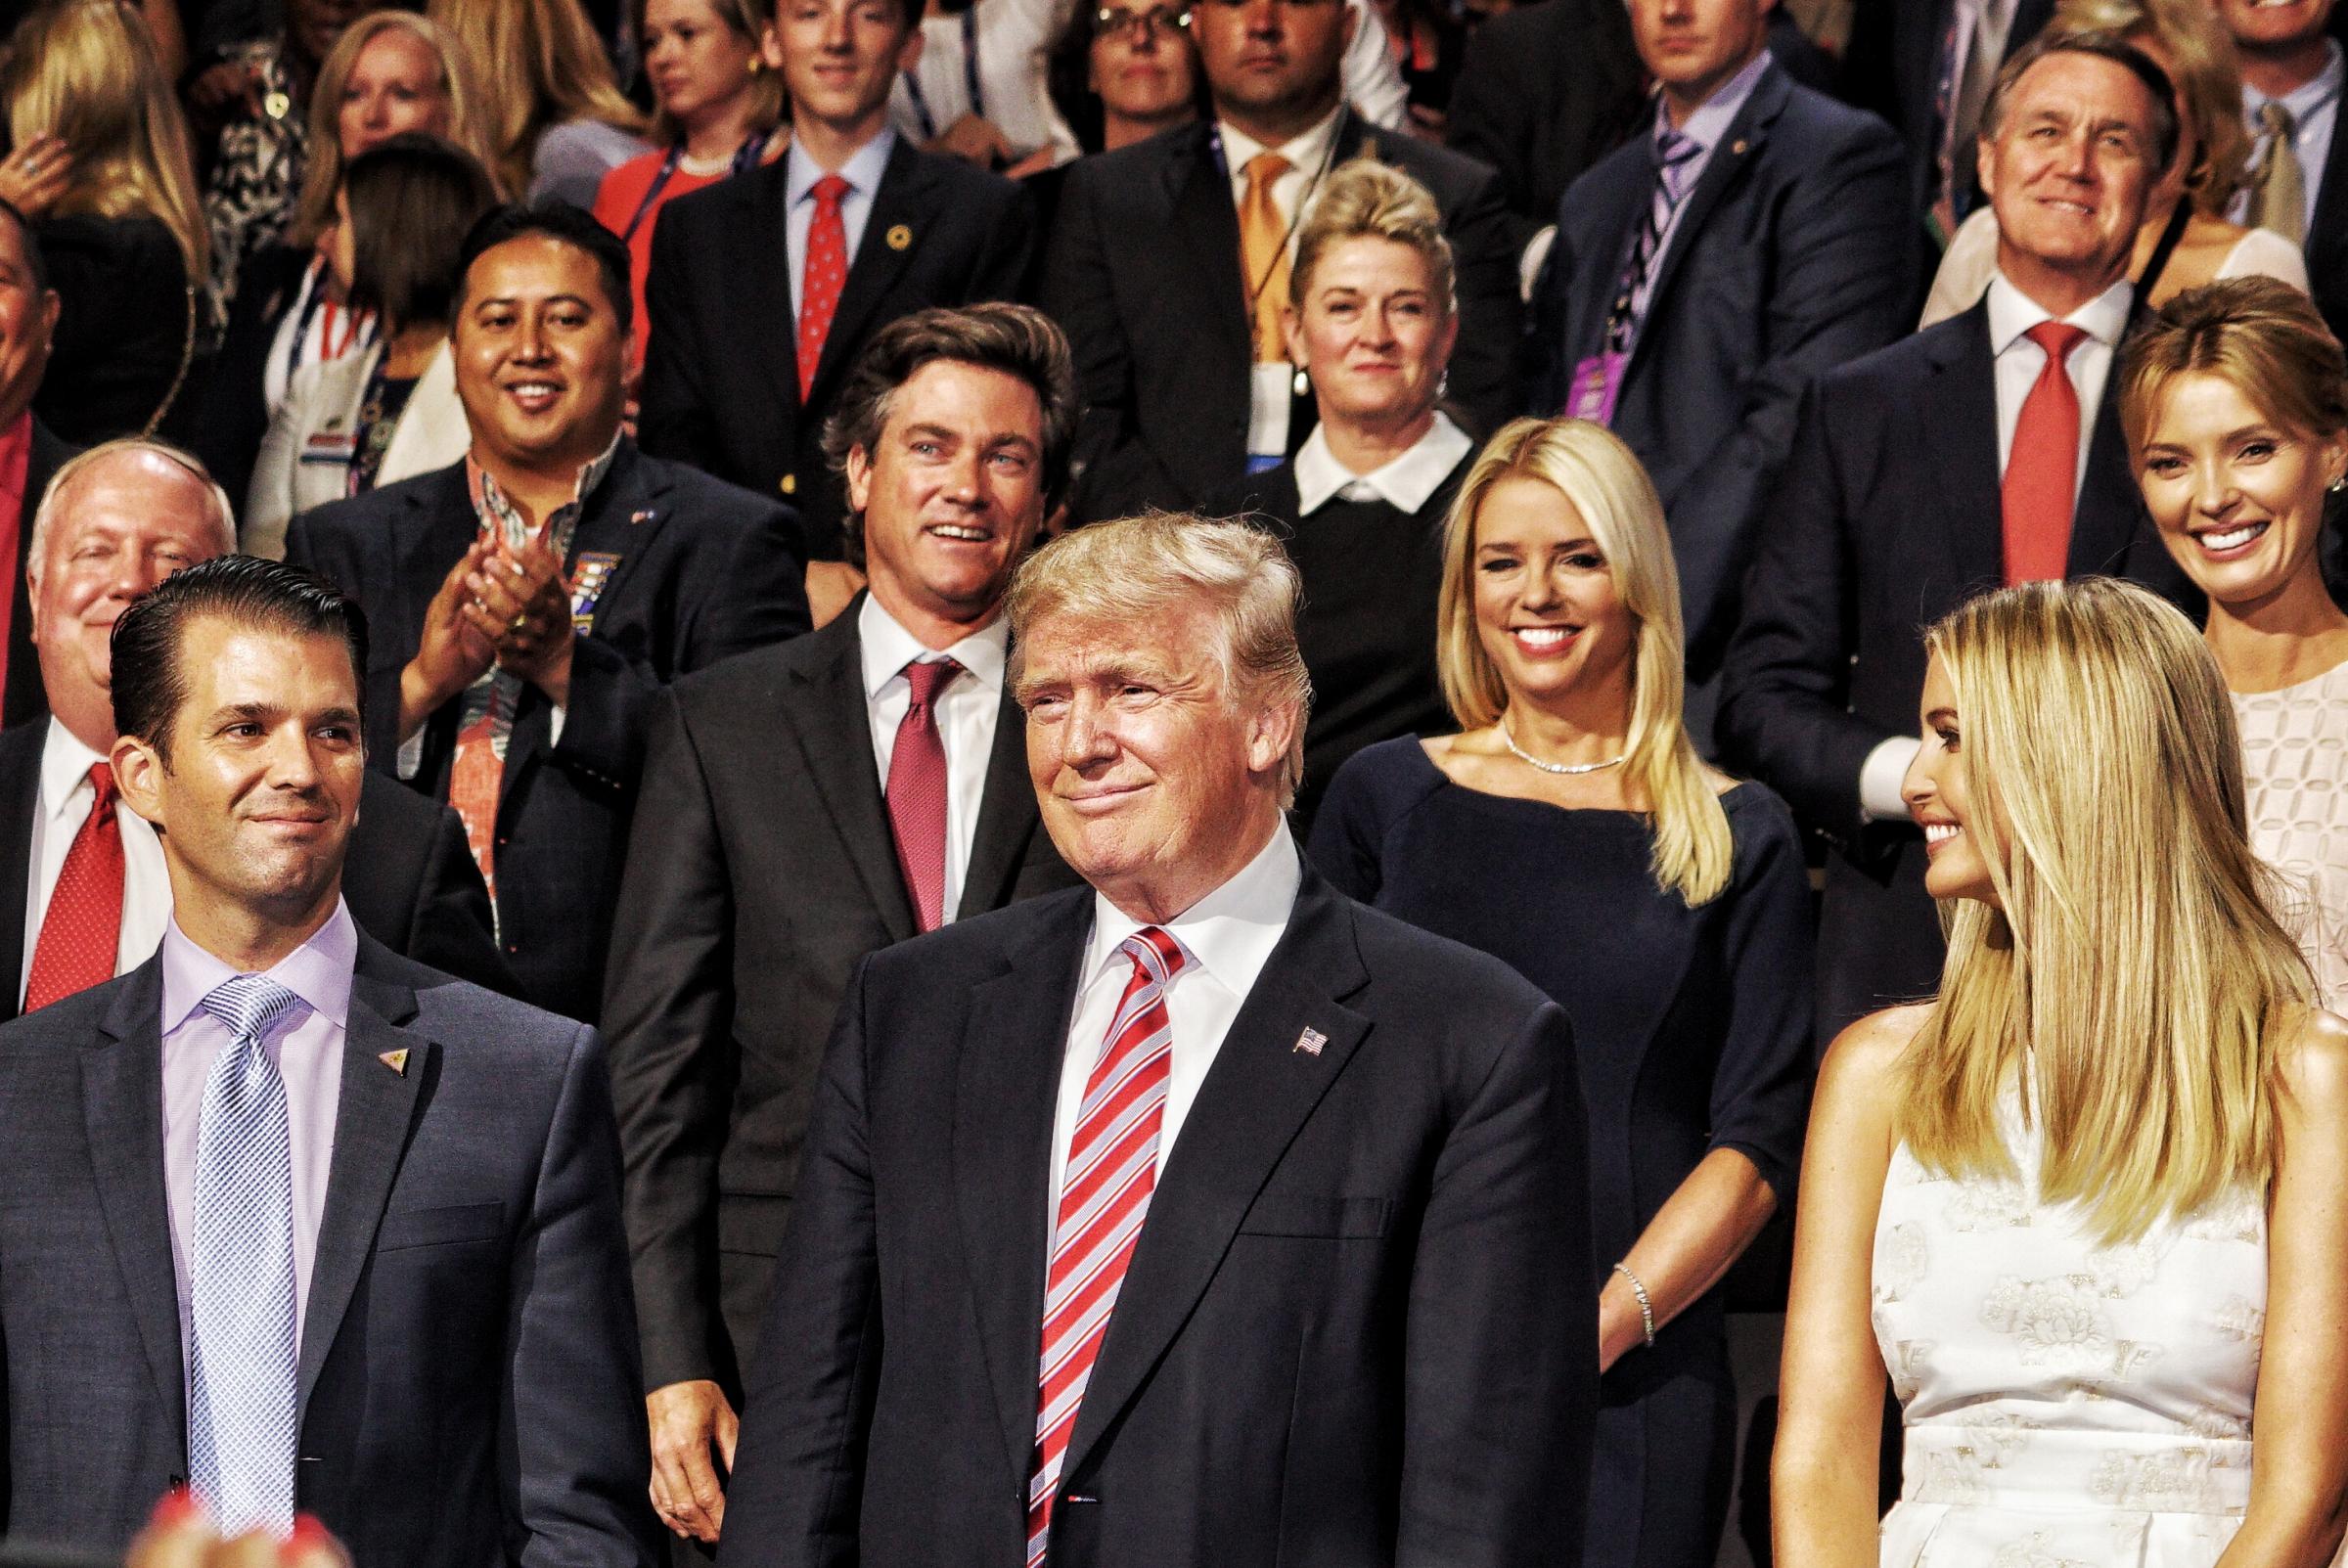 Donald Trump with his children Eric and Ivanka Trump at the Republican National Convention in Cleveland, on July 20, 2016.